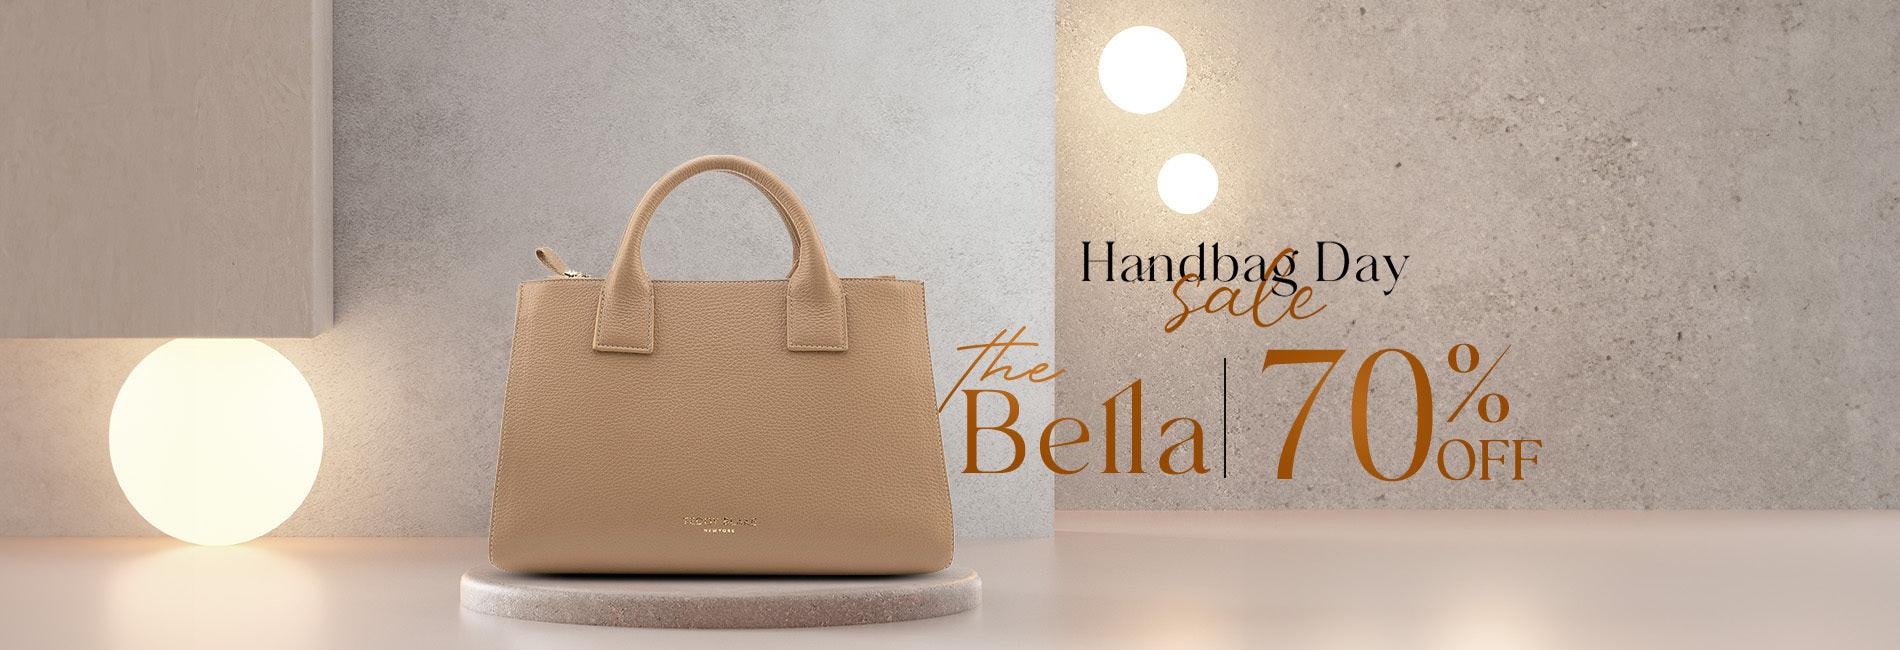 The Bella Satchel - Shoulder Leather Handbag - Available in mini, medium  and large bag size. Discover 50+ colors - Teddy Blake – Tagged black